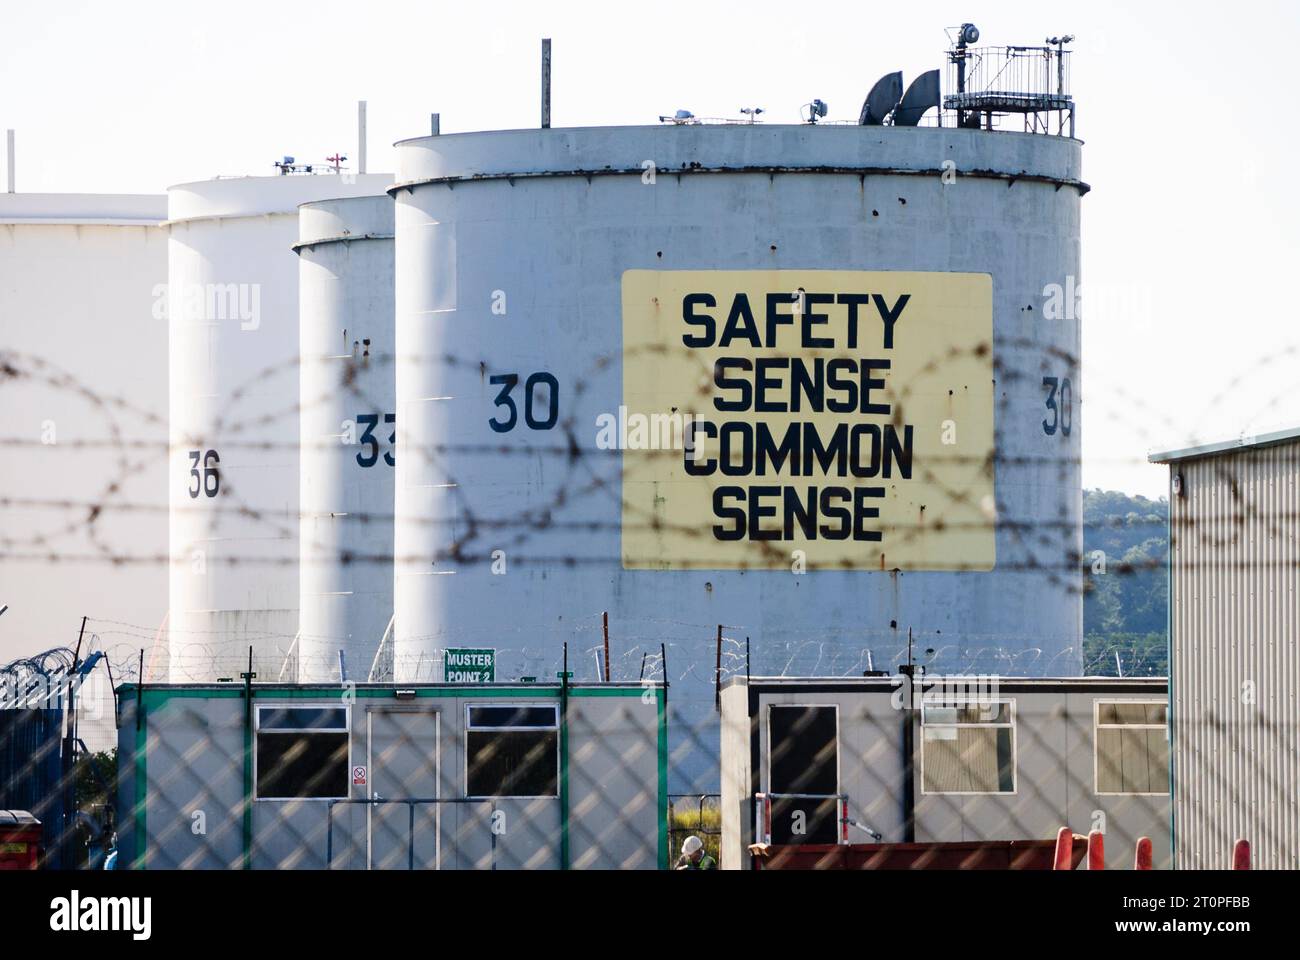 Petrol tankers with the message 'Safety Sense Common Sense' at an oil storage depot. Stock Photo